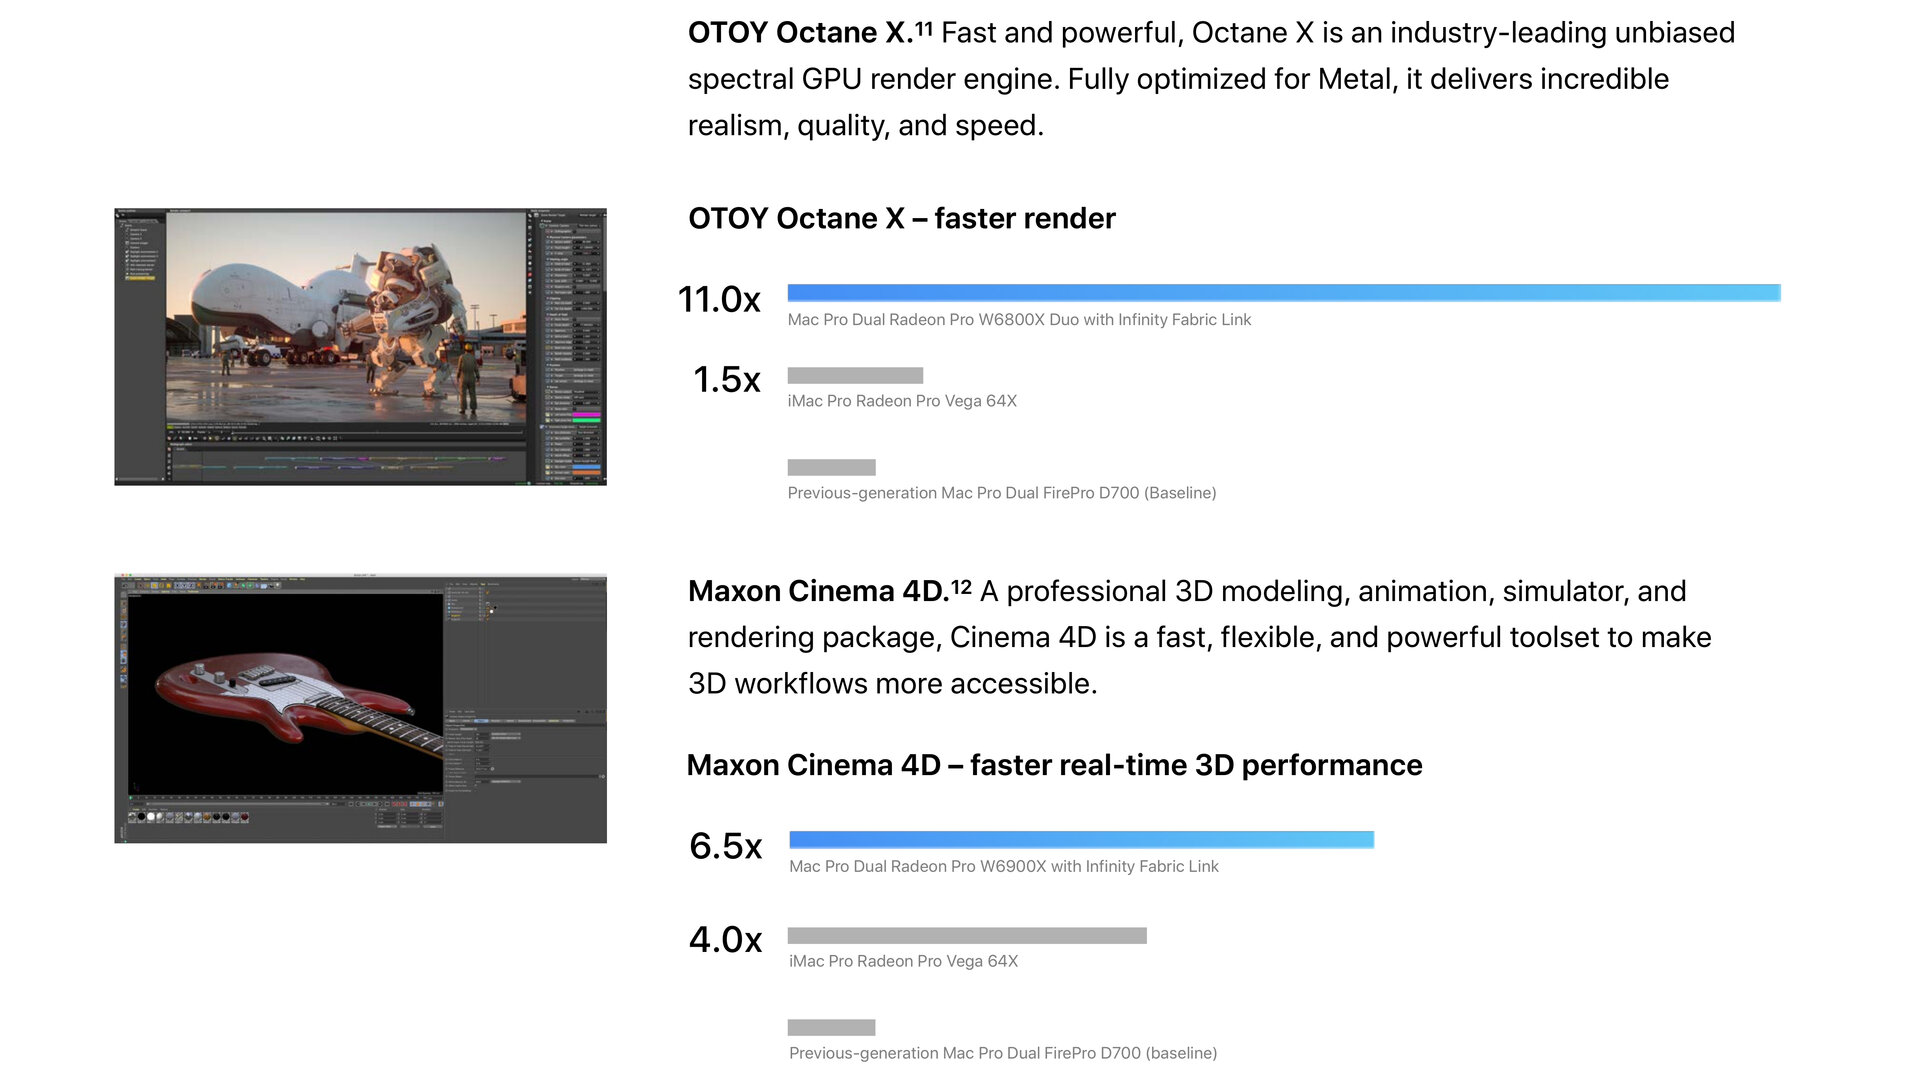 Graphics performance in OTOY Octane X and Maxon Cinema 4D